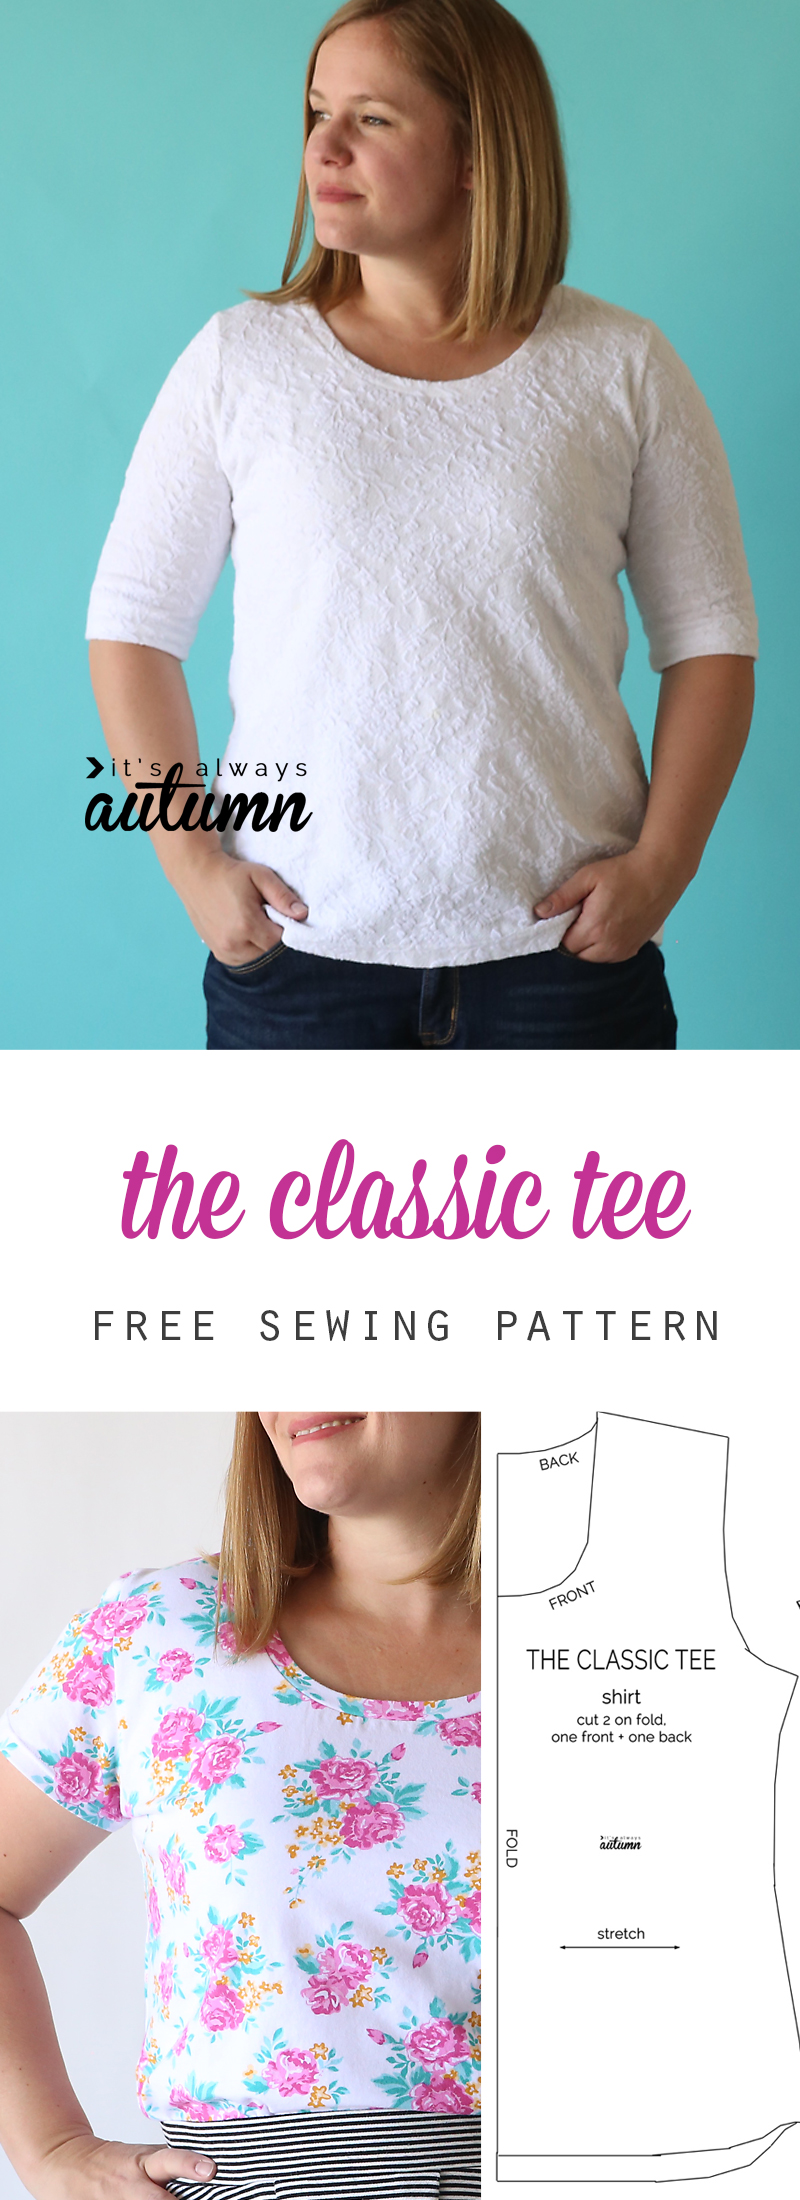 the classic tee free pattern | elbow length sleeves - It's Always Autumn